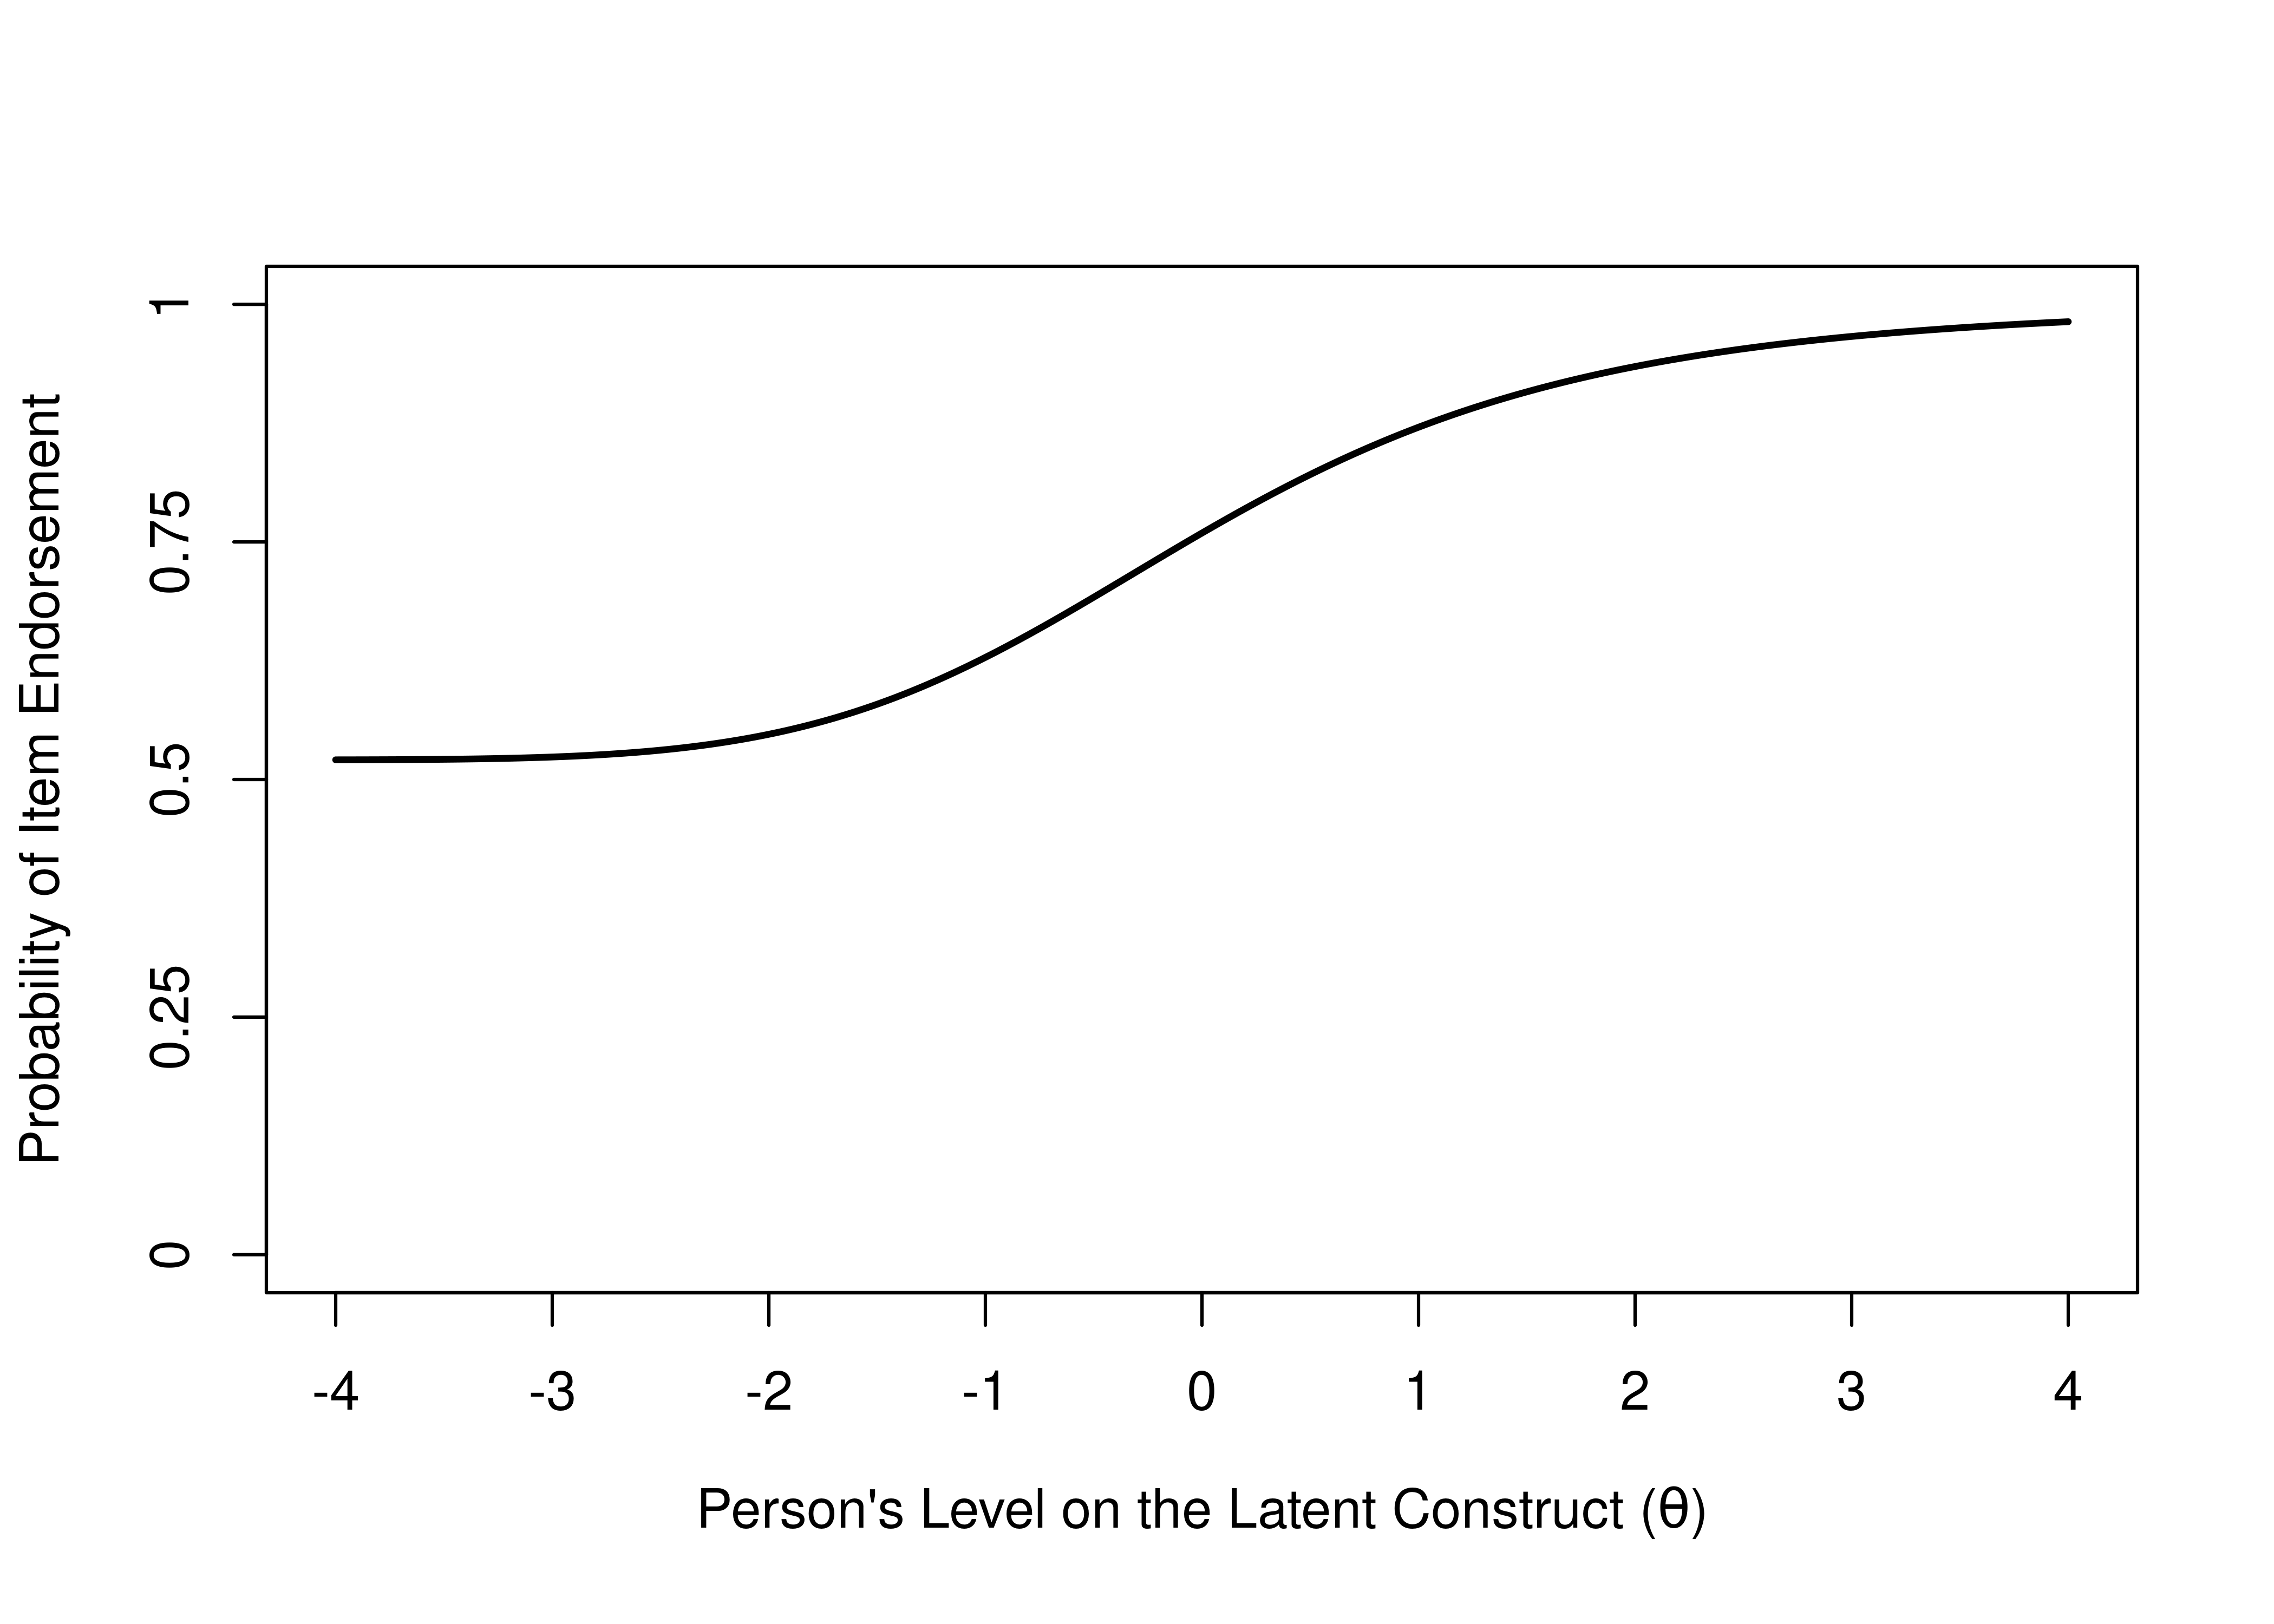 Item Characteristic Curve of an Item from a True/False Exam, There Test Takers Get the Item Correct at Least 50% of the Time.